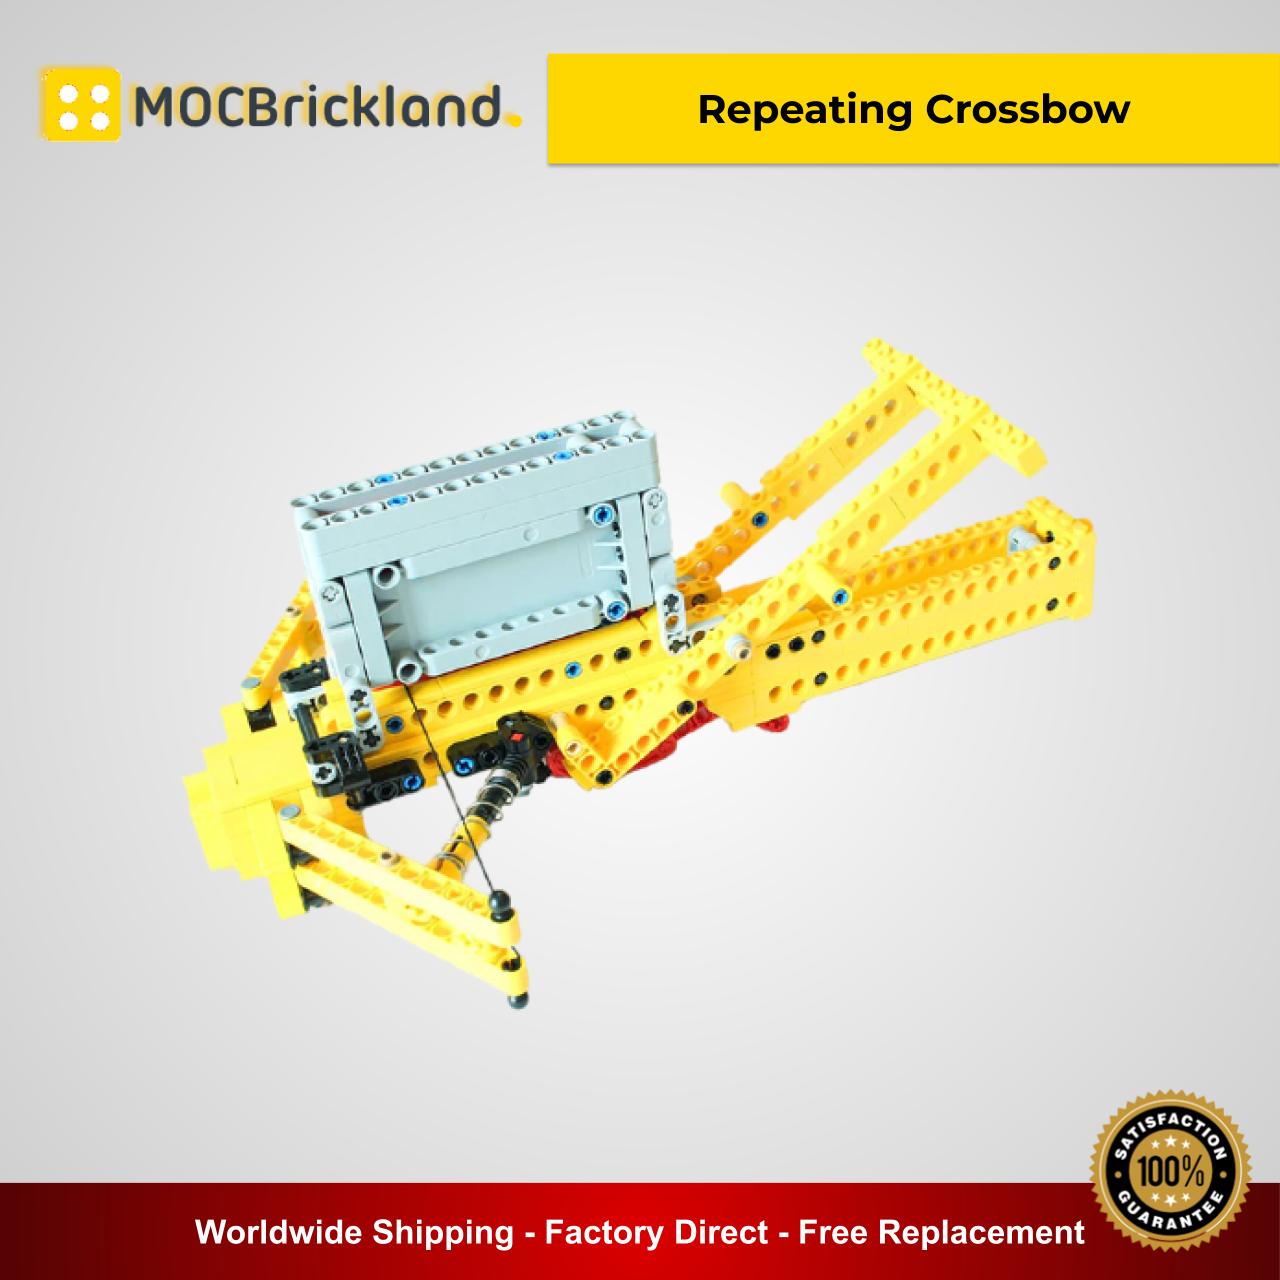 MOCBRICKLAND MOC-9058 Repeating Crossbow